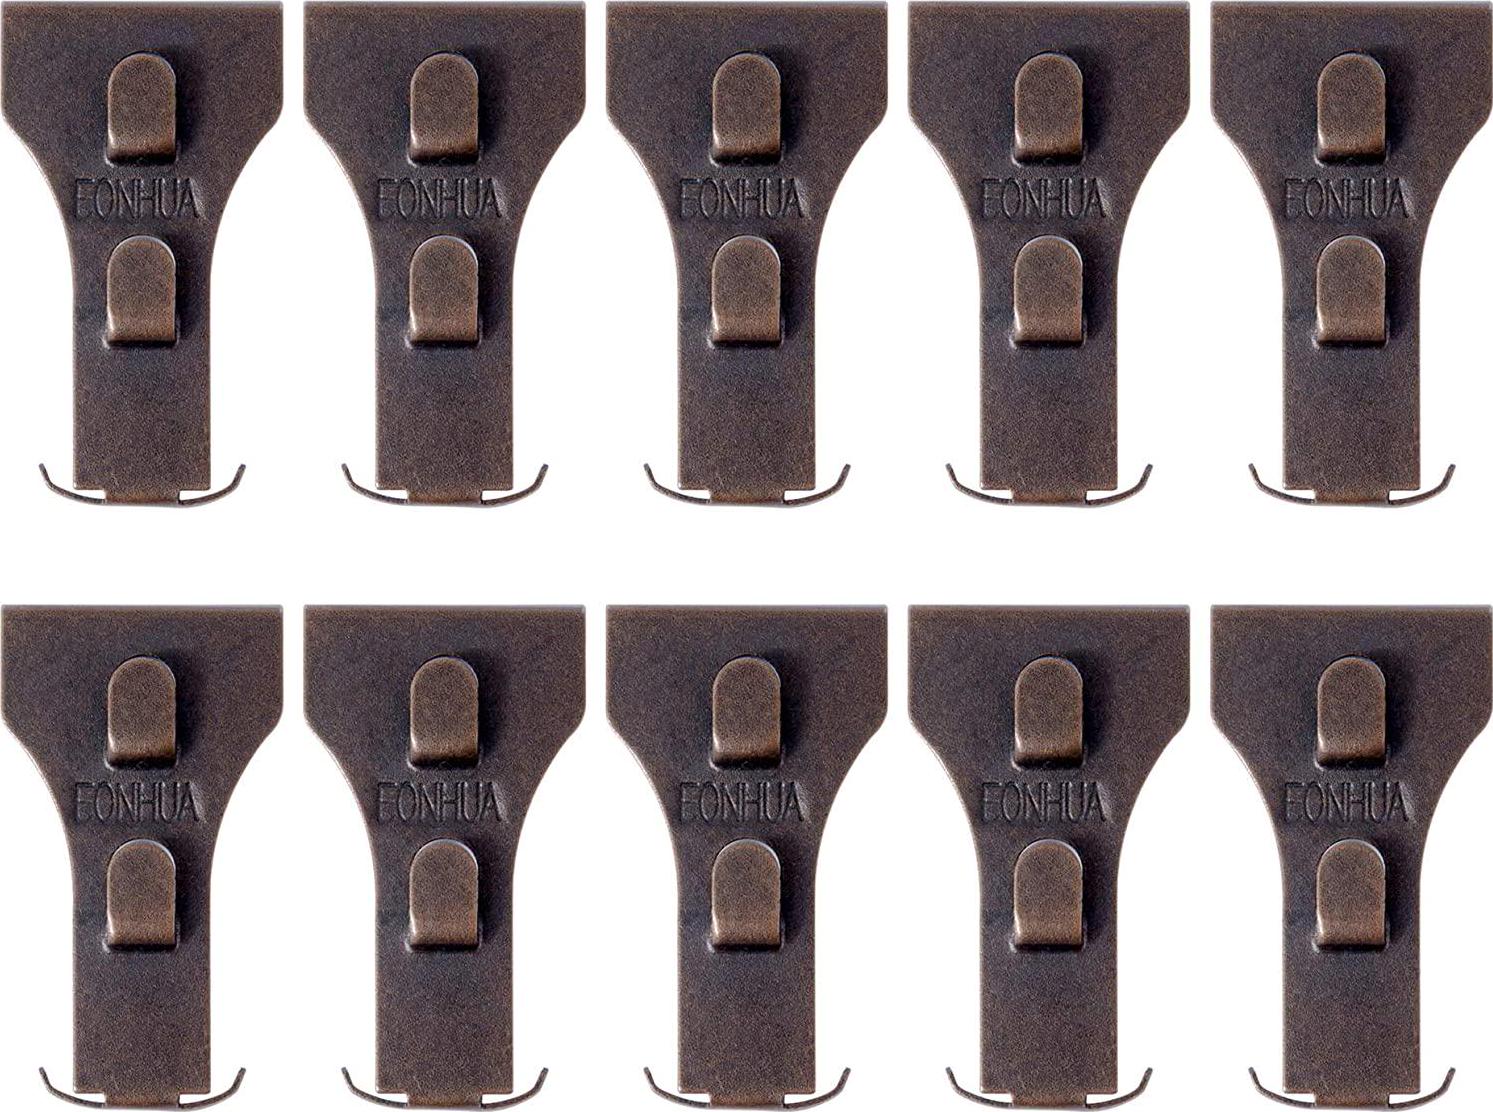 EONHUA, EONHUA Brick Hook Clips for Hanging,Metal Fastener Hooks Height Mural Wreath Lights Holiday Decorations Fits Brick 2-1/4 inch to 2-3/8 inch (10pc, Bronze)